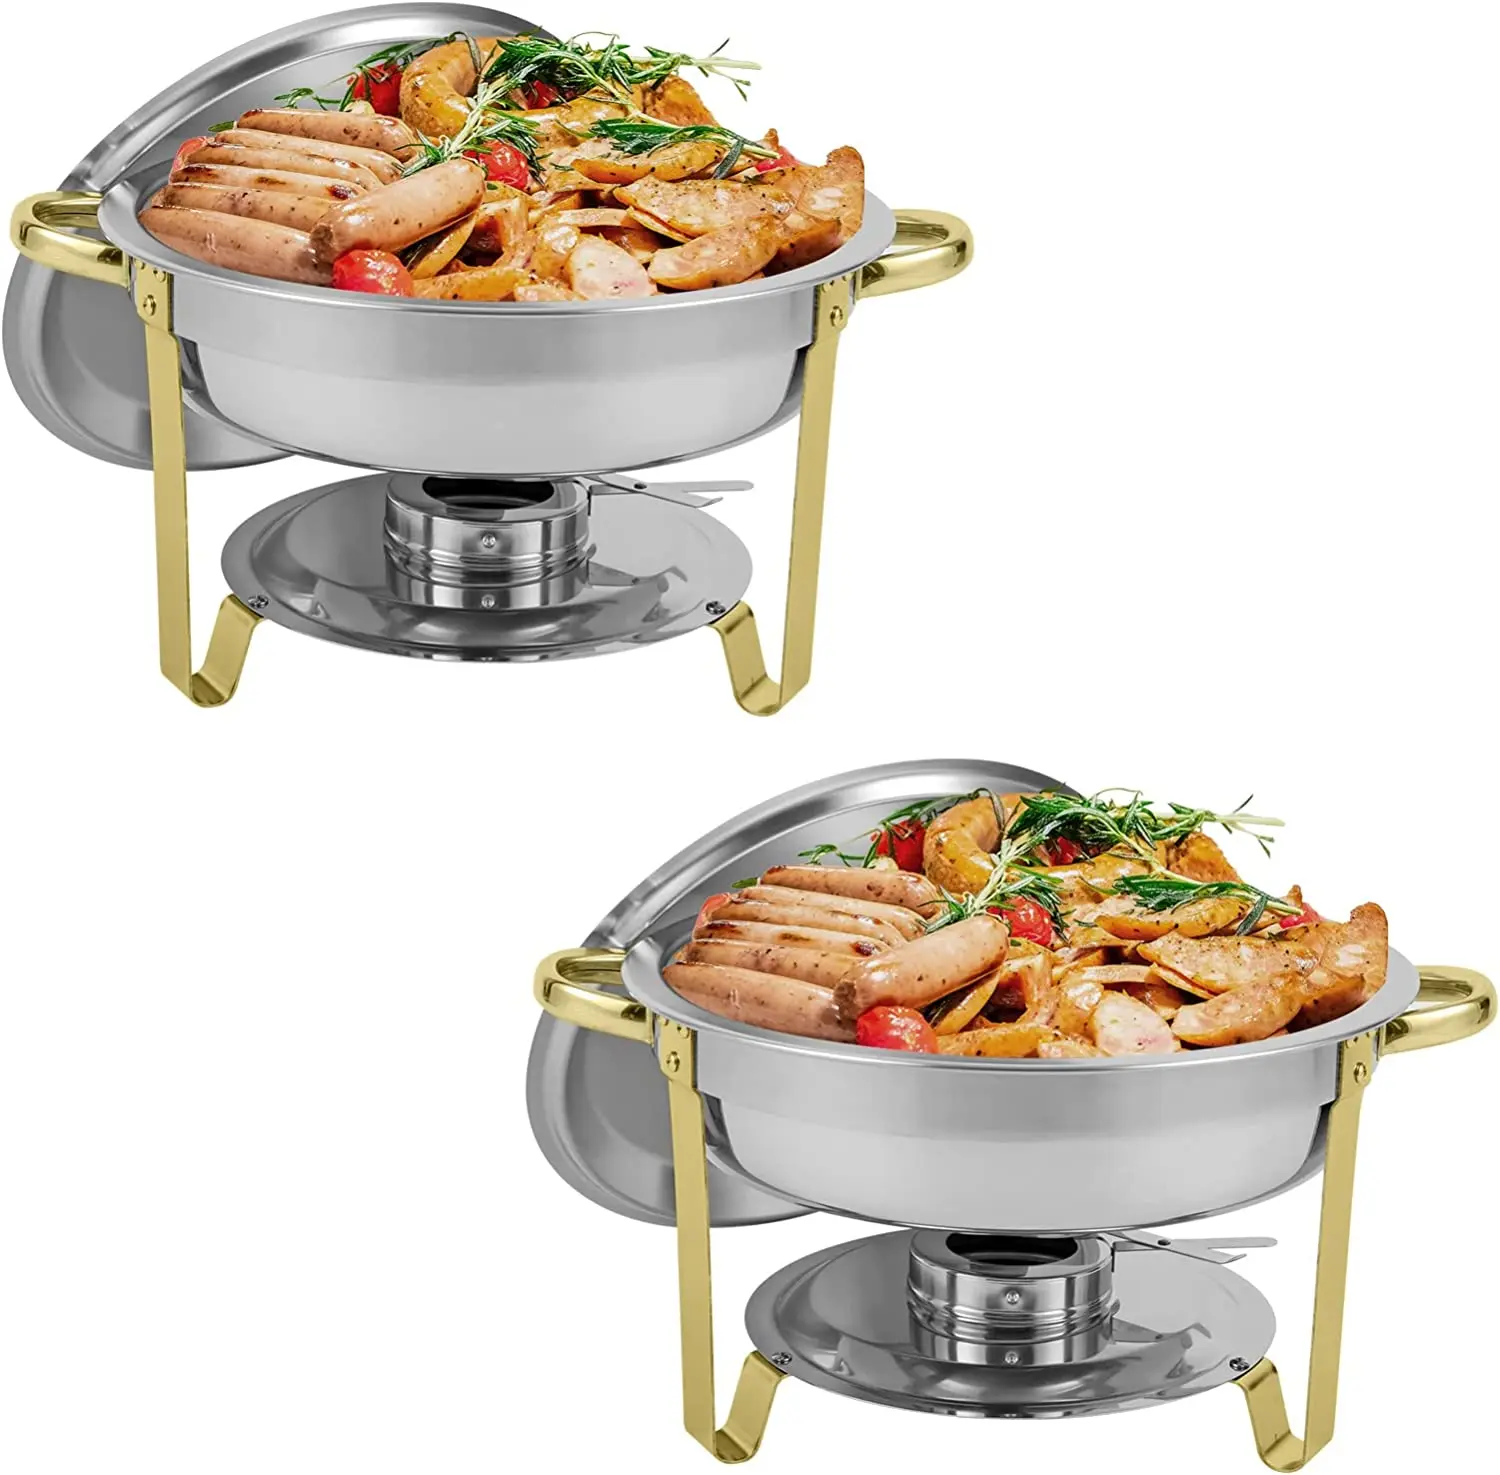 

Chafing Dish Buffet Set 2 Pack Round Stainless Steel Foldable Chafers and Buffet Warmers Sets 5 QT Full Size w/Water Pan, Food P